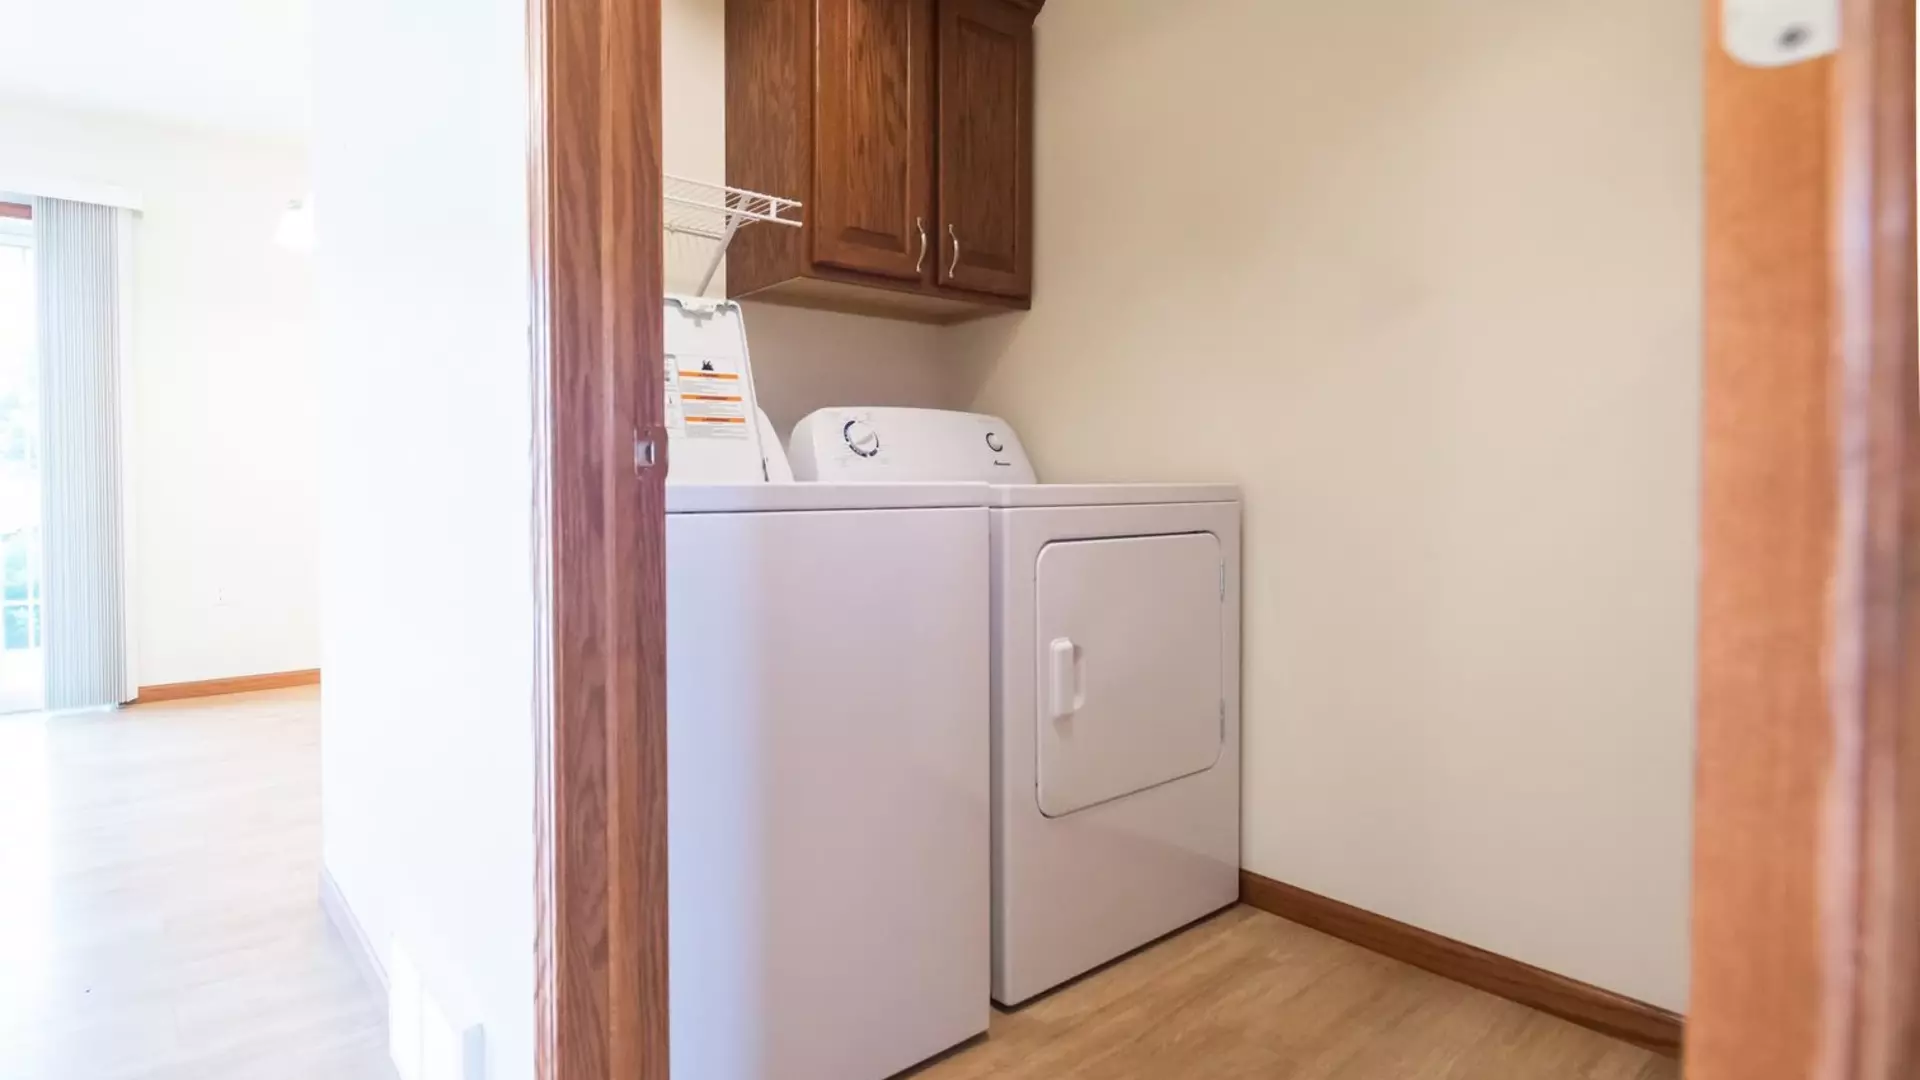 Laundry room in resident and fellow housing.